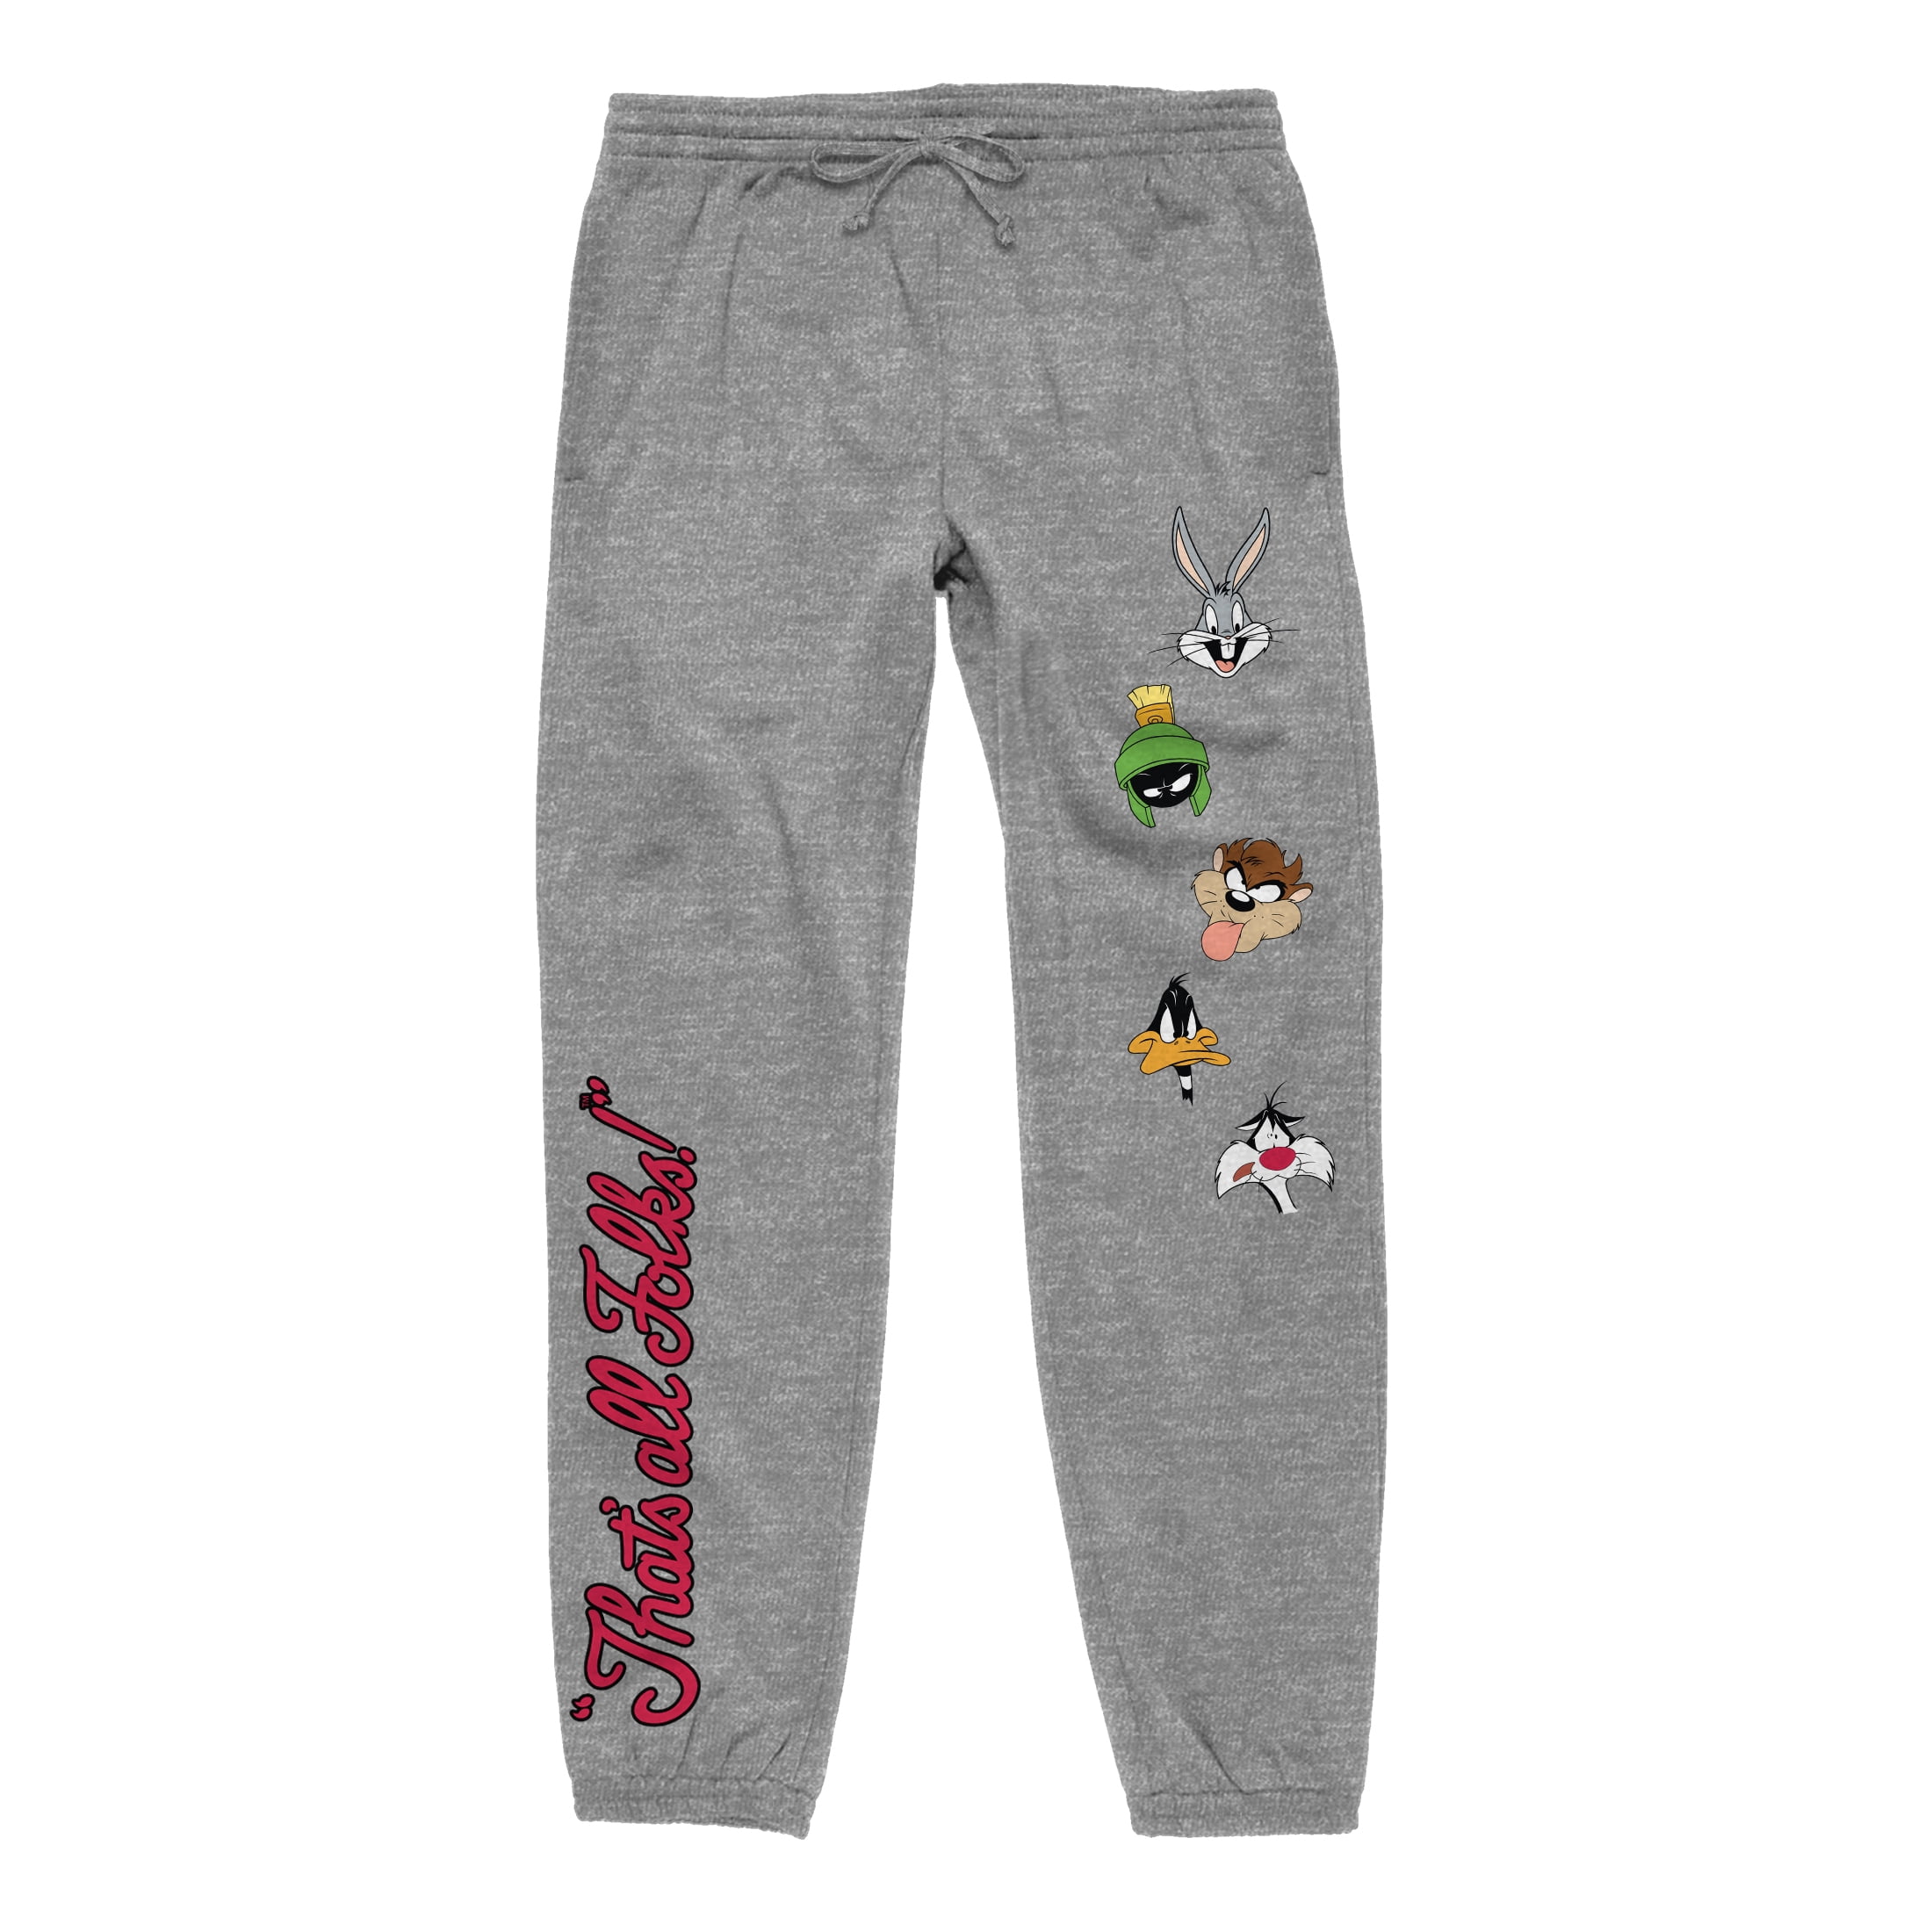 Looney Tunes That\'s All Folks! Adult Heather Grey Graphic Sweatpants- M